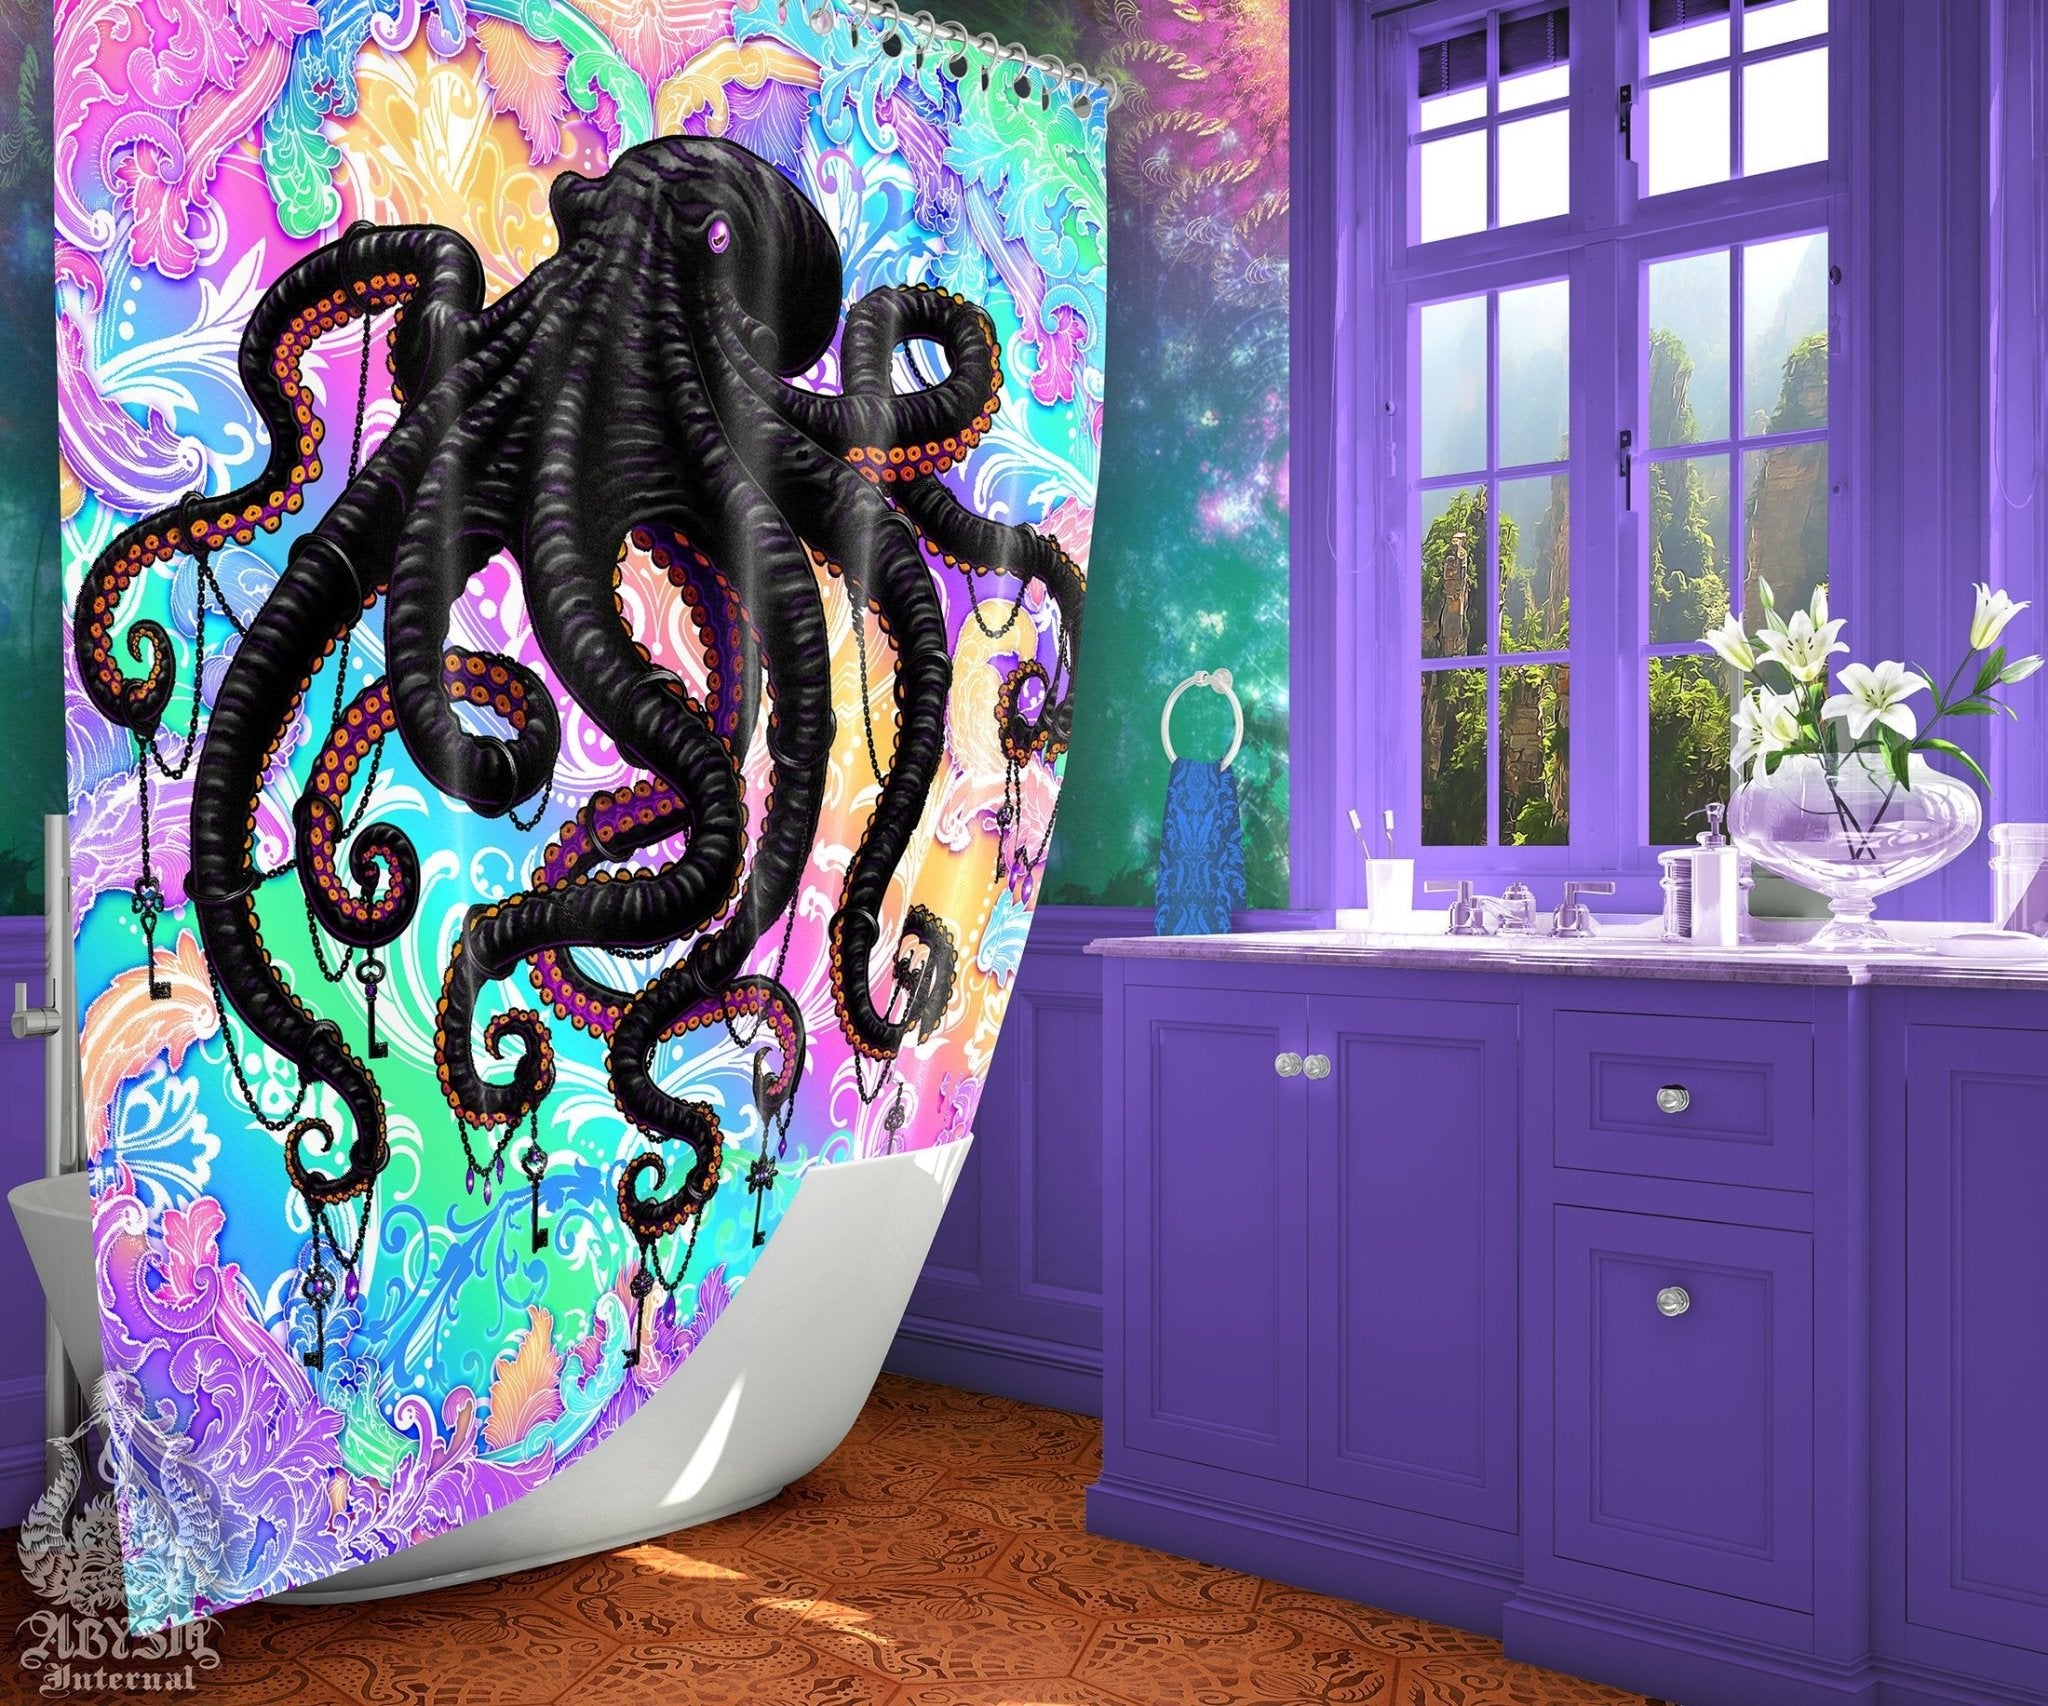 Octopus Shower Curtain, Holographic Bathroom Decor, Eclectic and Funky Home - Fairy Kei, Pastel Punk Black - Abysm Internal